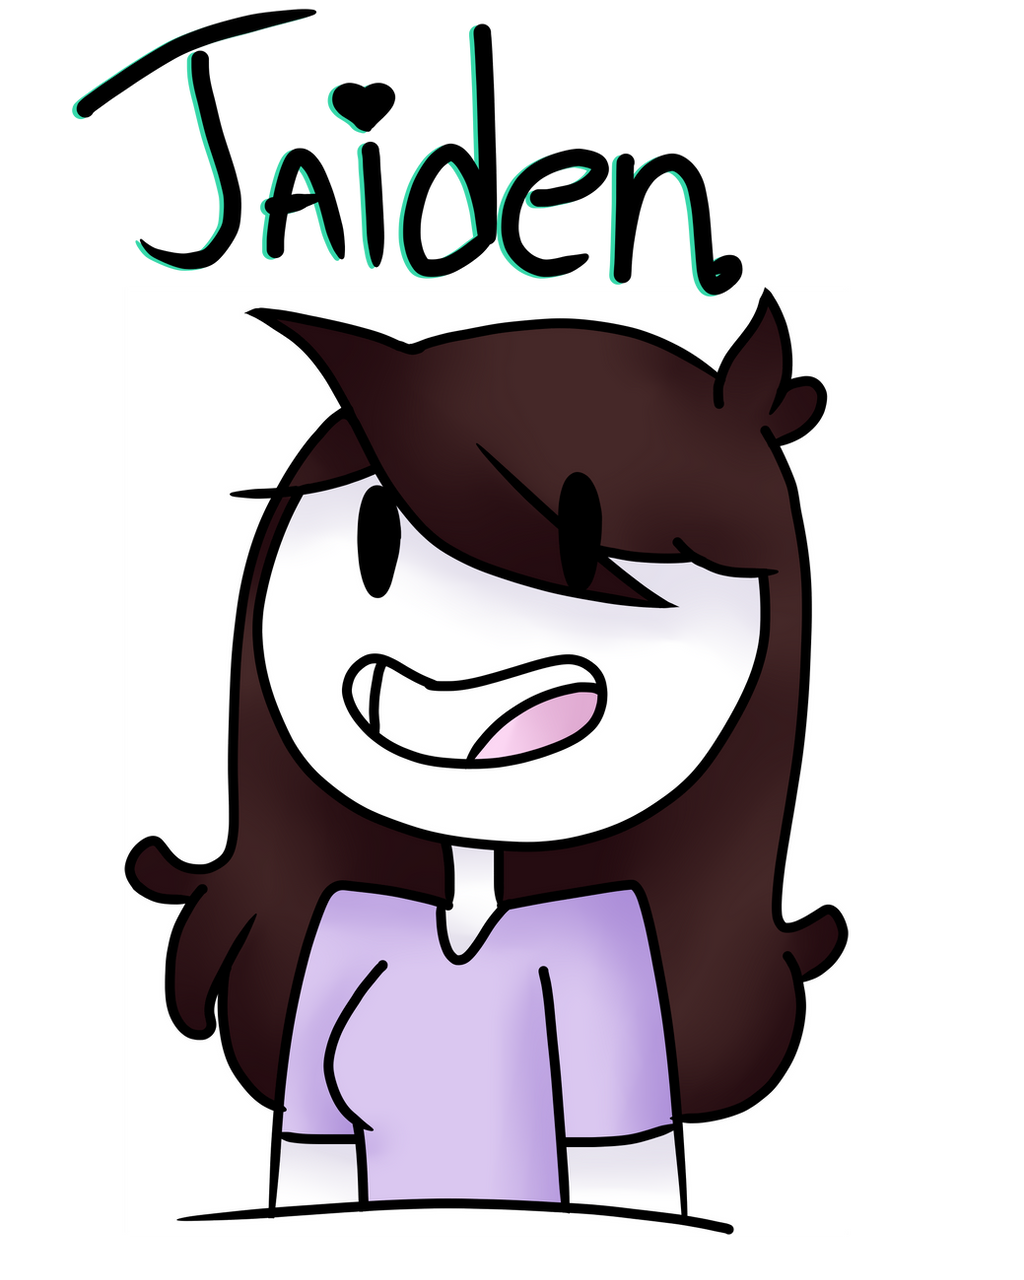 Jaiden Animations Faces Drawings Related Keywords & Suggesti